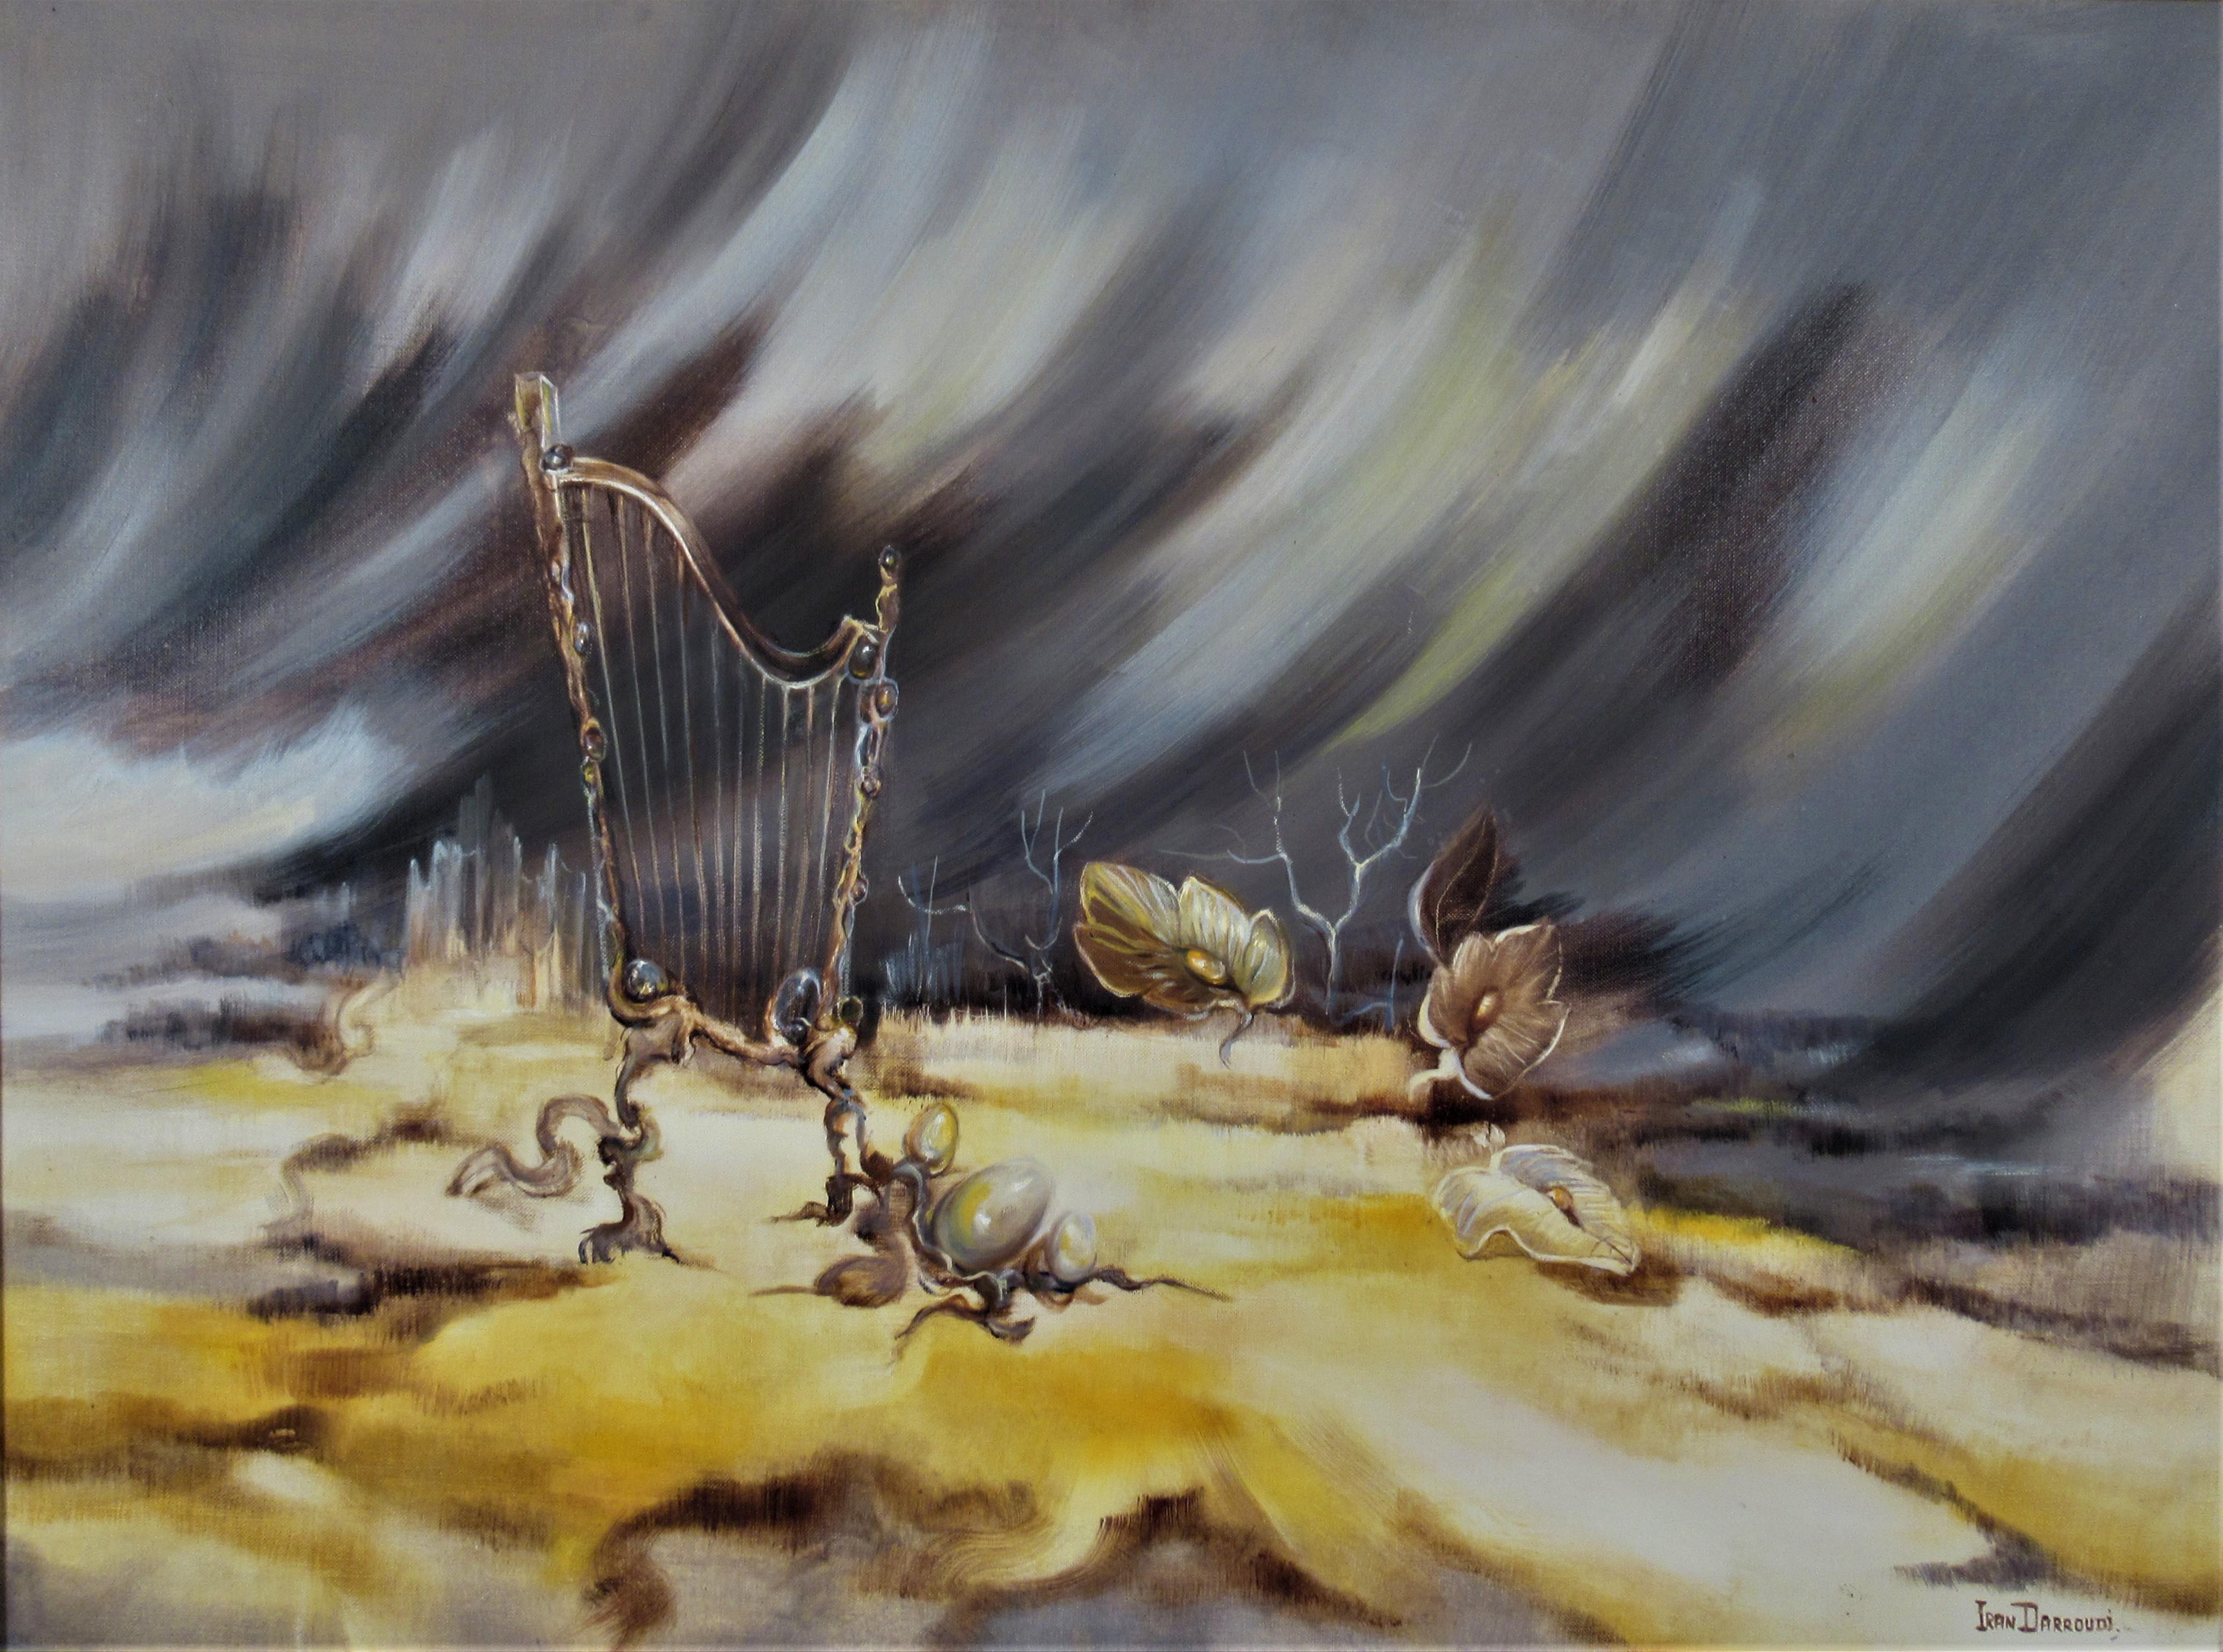 Surrealist Landscape with Harp - Painting by Iran Darroudi